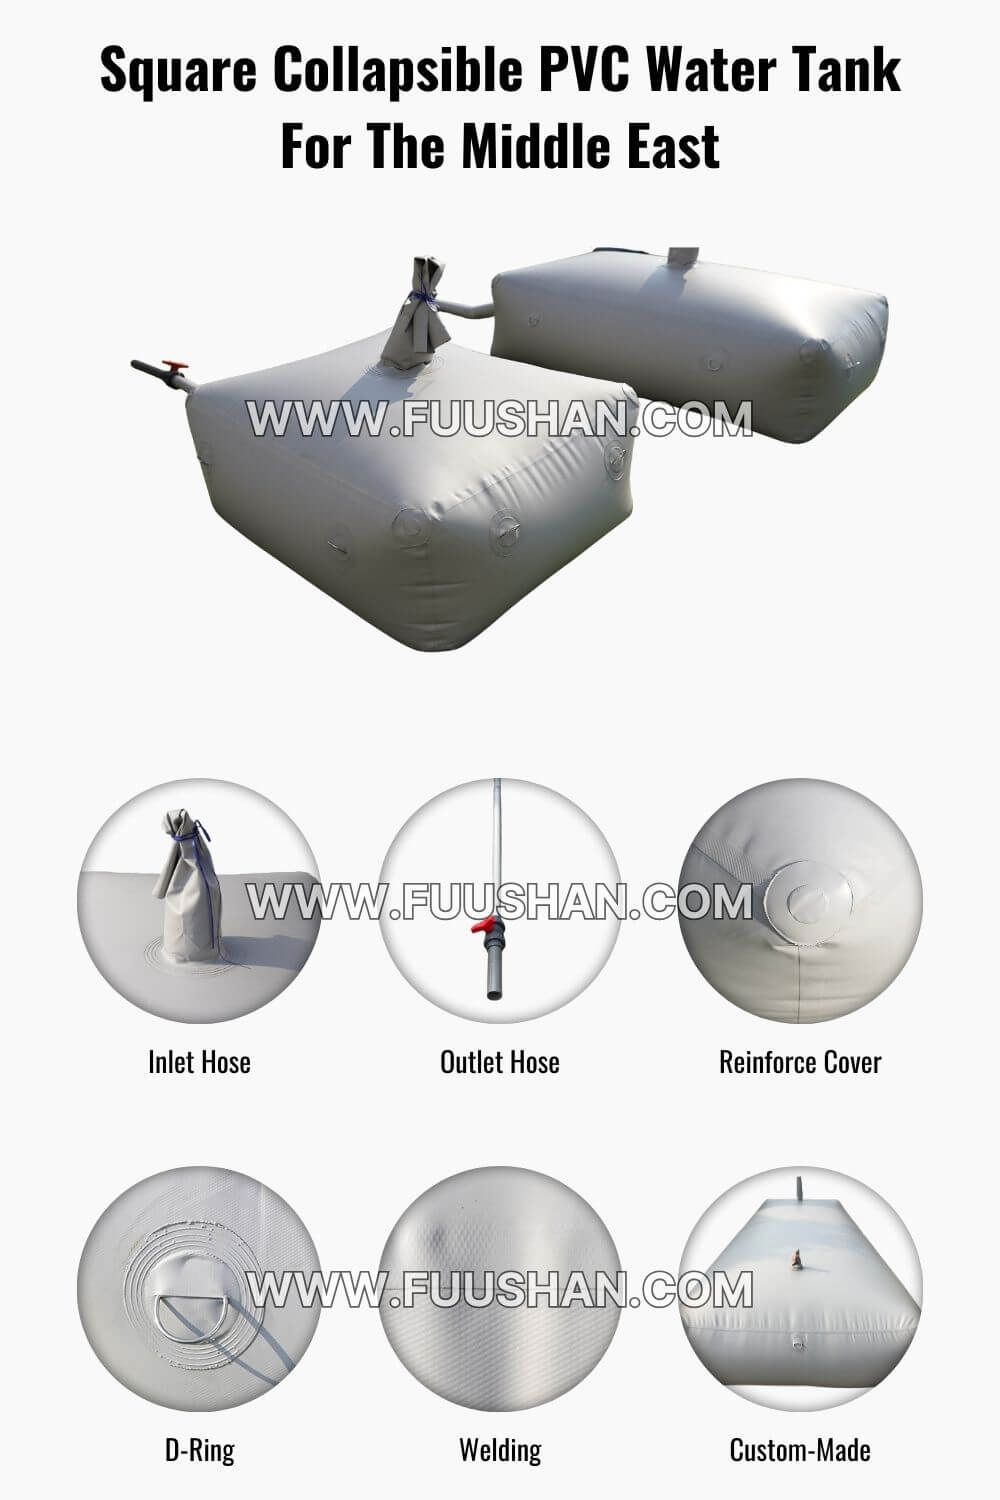 square collapsible pvc water tank for the middle east detail